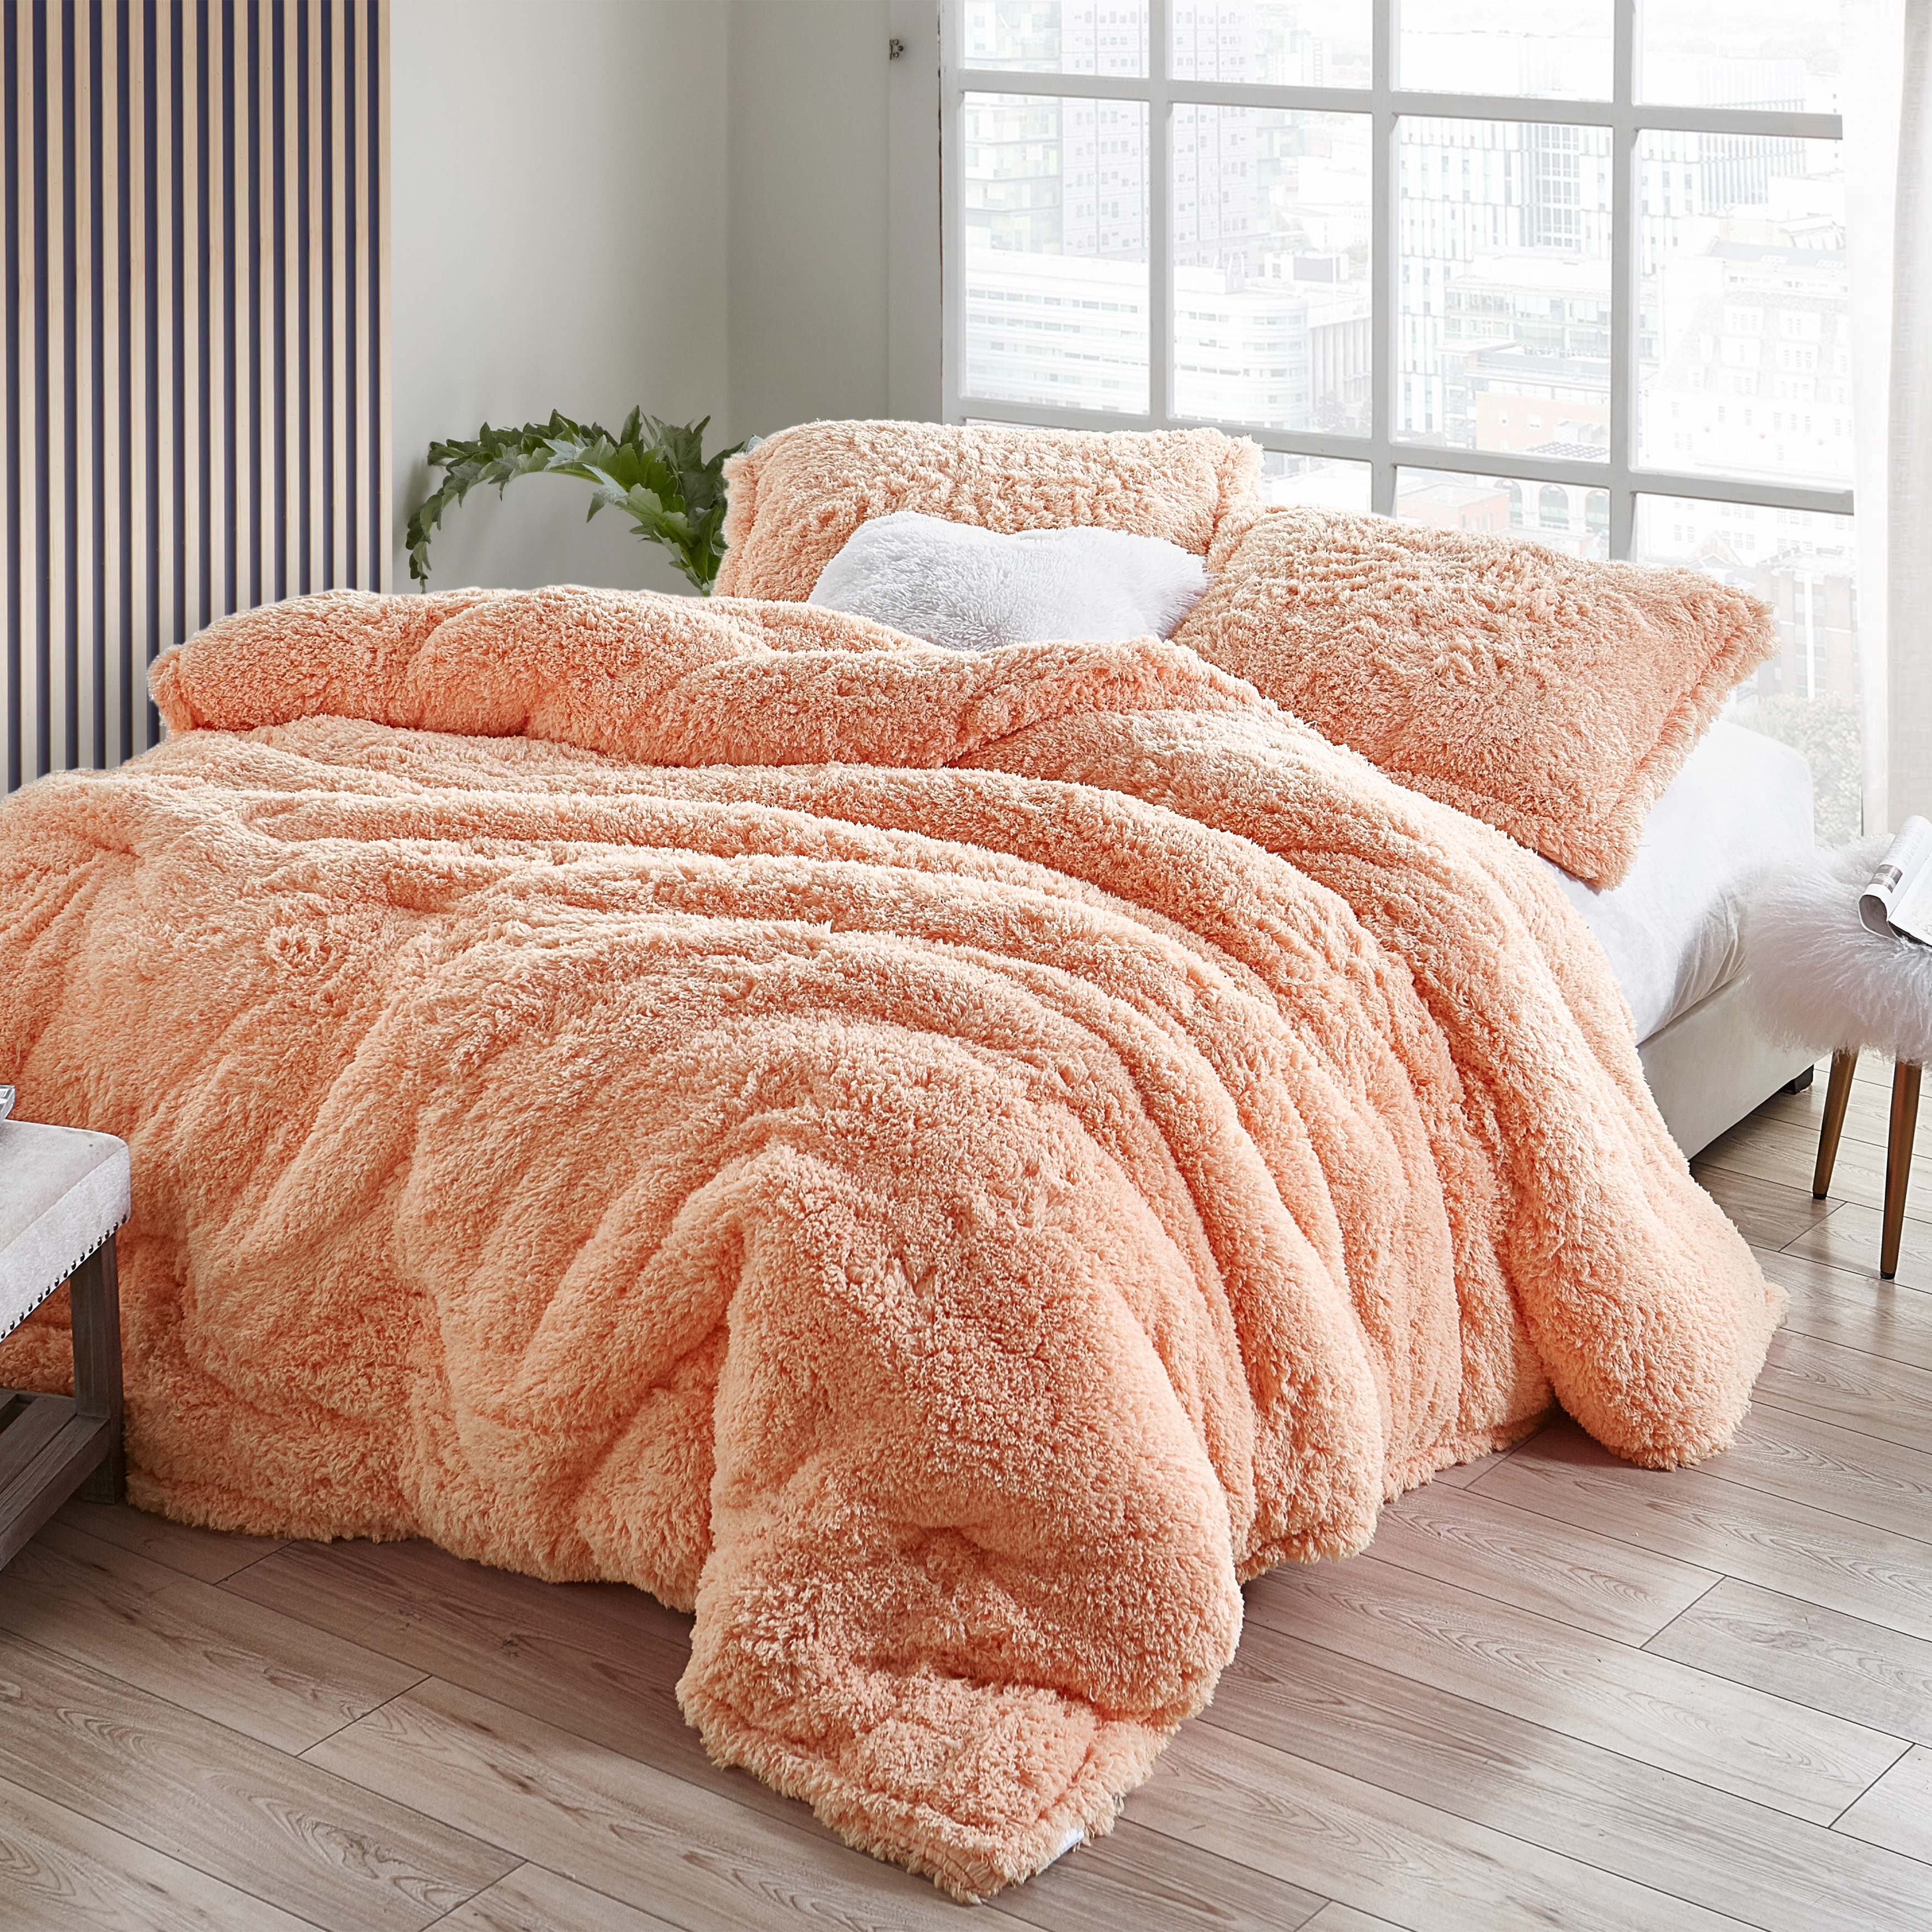 https://checkout.byourbed.com/product_images/o/496/Coma_Inducer_Comforter-Winter_Think_Peach_Nectar_A41-ver1-Elite_Studio_6___51955.jpg